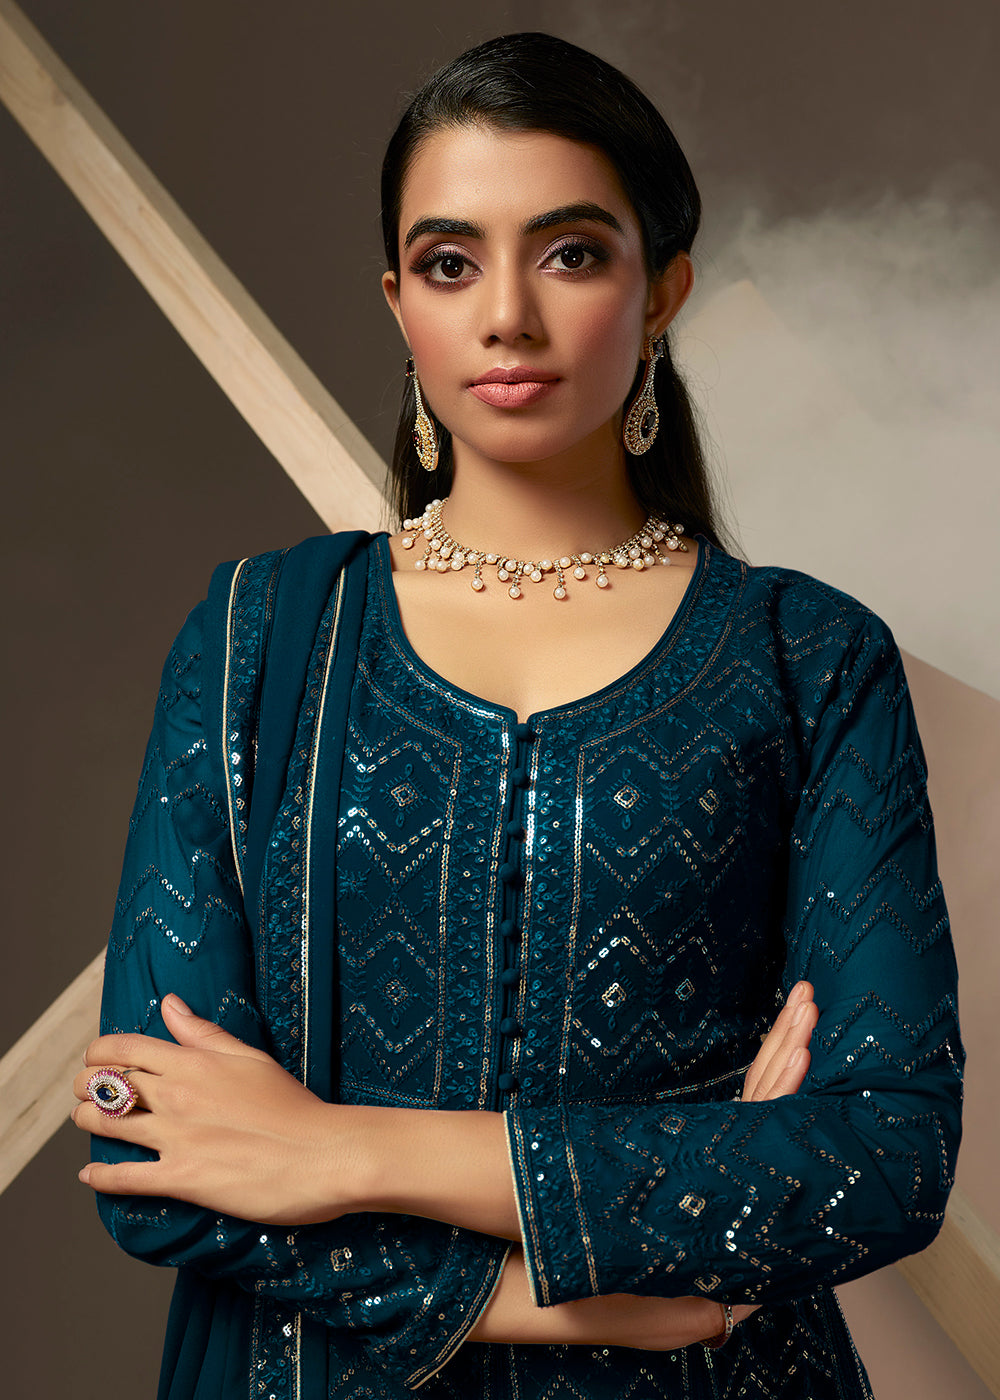 Buy Now Turquoise Blue Lucknowi Style Embroidered Georgette Gown Online in USA, UK, Australia, New Zealand, Canada & Worldwide at Empress Clothing. 